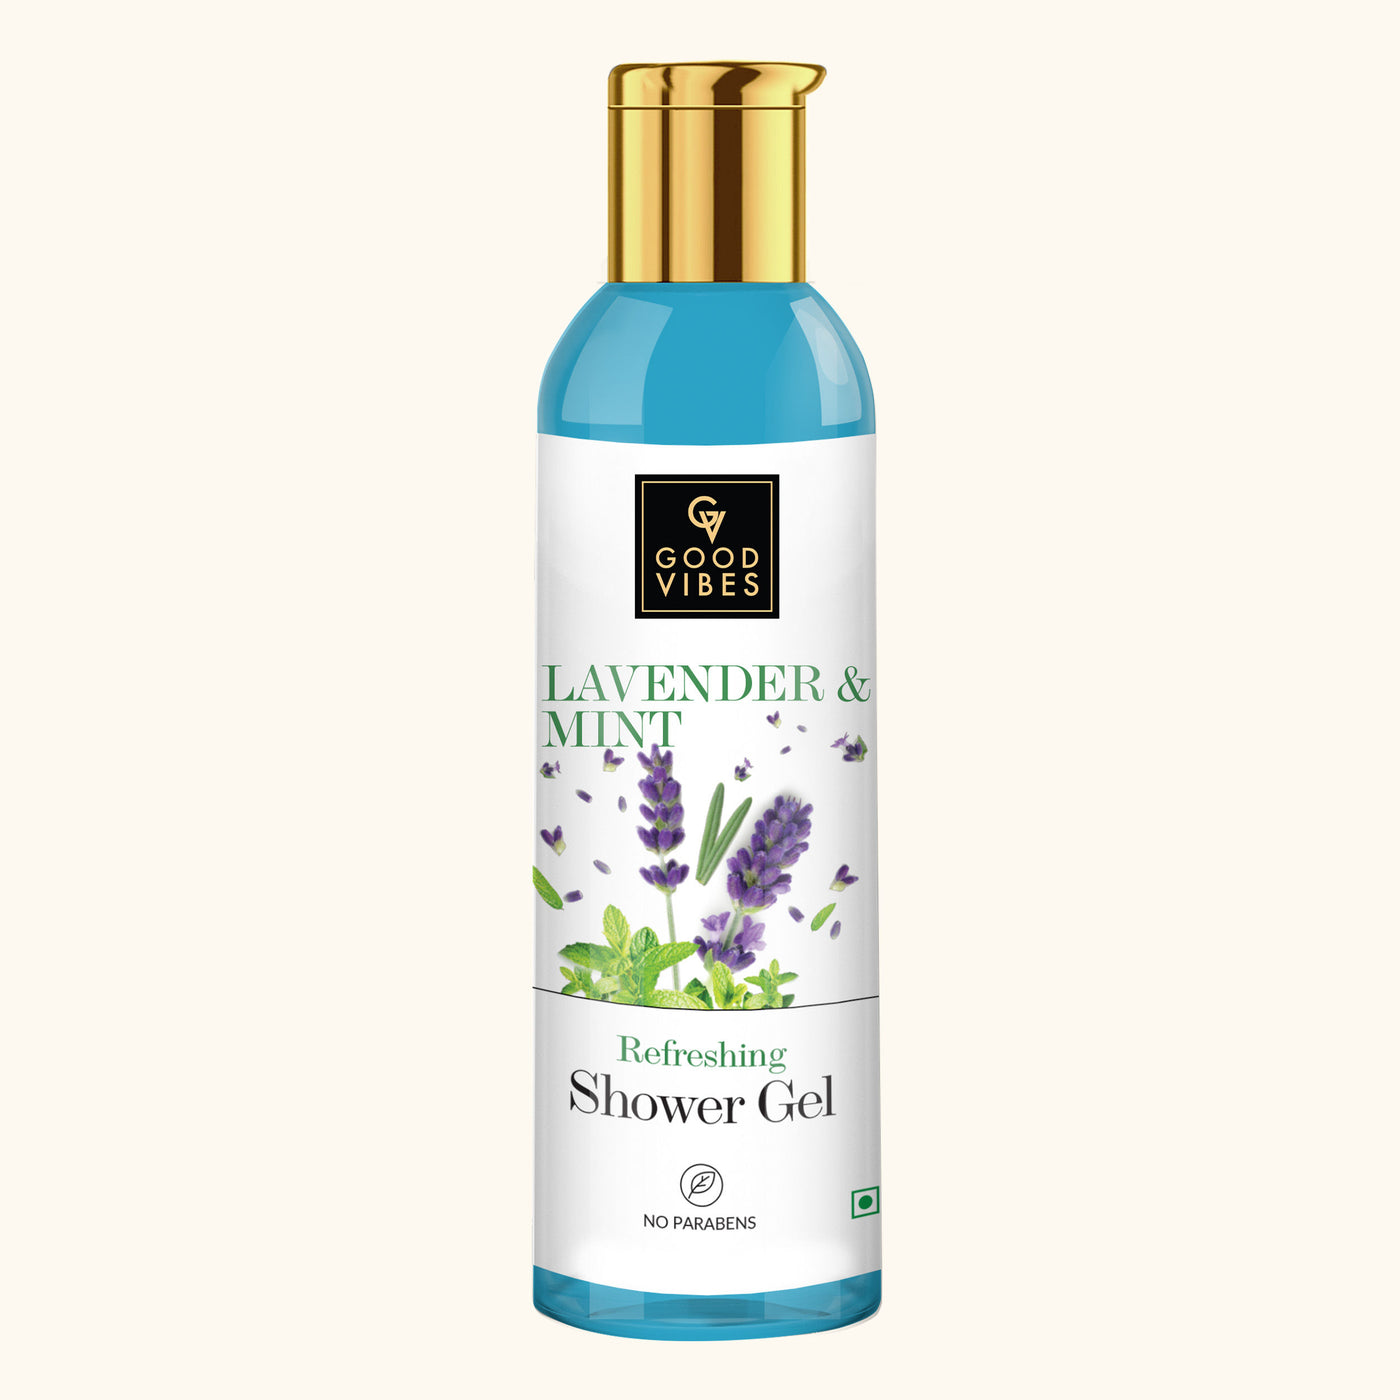 good-vibes-refreshing-shower-gel-lavender-and-mint-200-ml-2-16-2